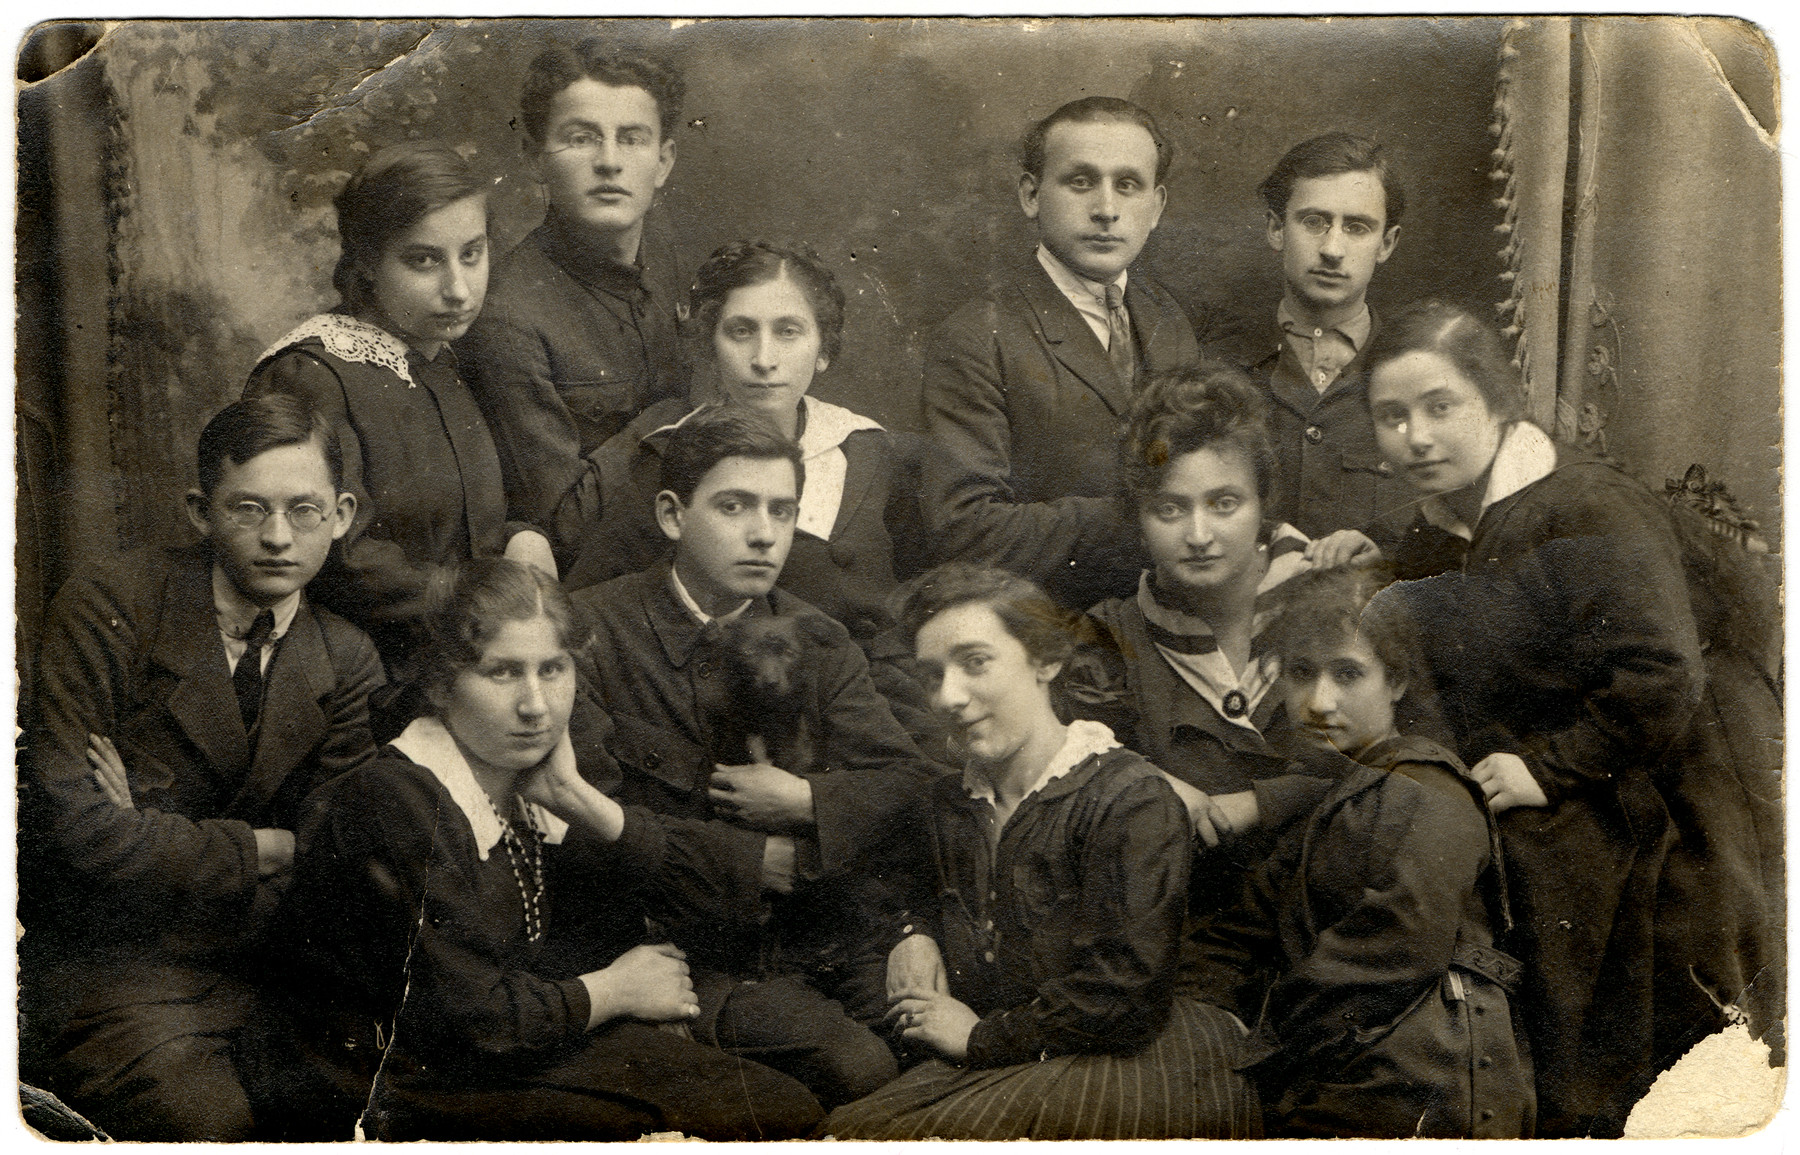 Group portrait of Jewish youth in prewar Poland.

Eva Obsbaum Seltzer is pictured in the middle row, second from the right.